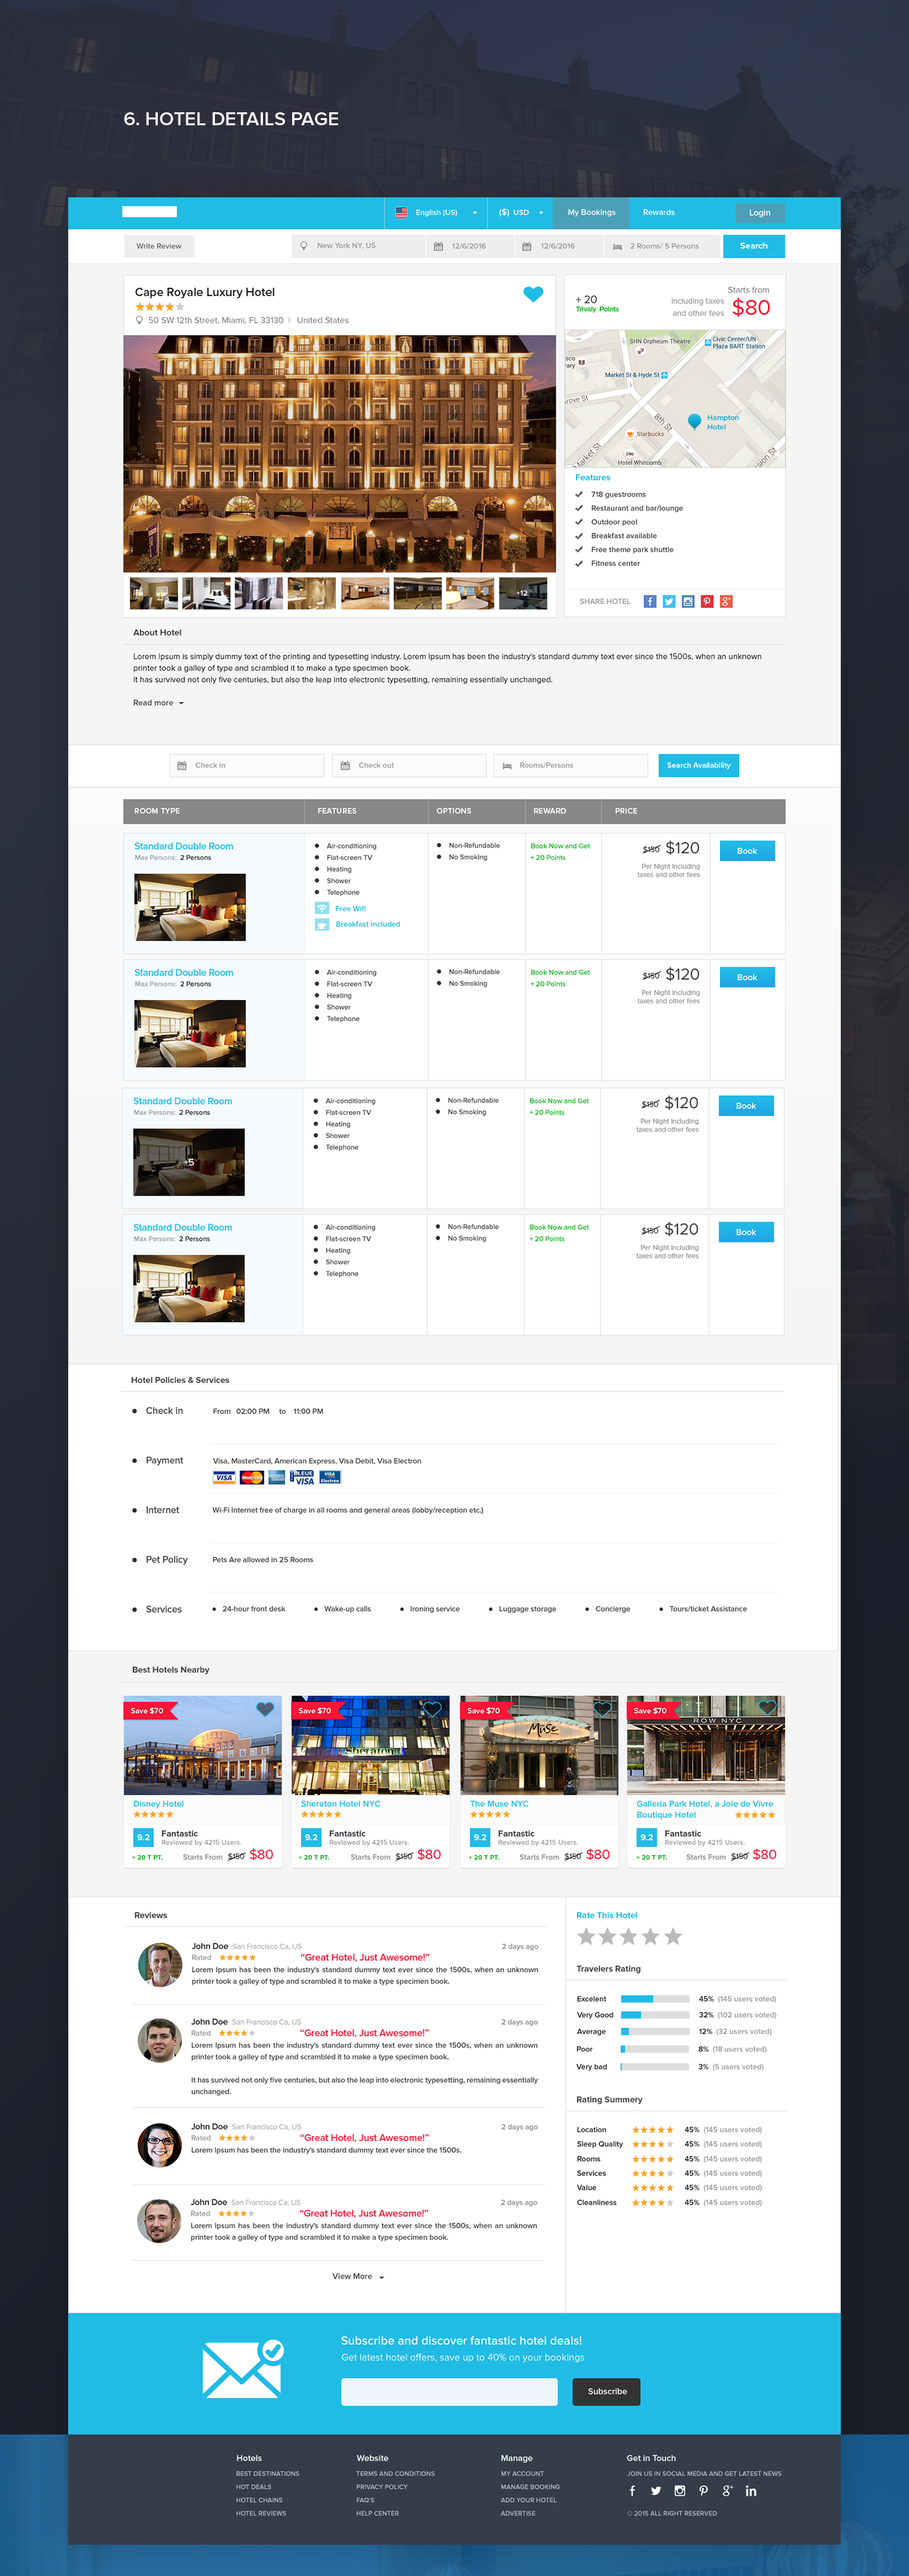 Web UI ux Travel hotel tourism Website Booking cards map search filters clean reservation